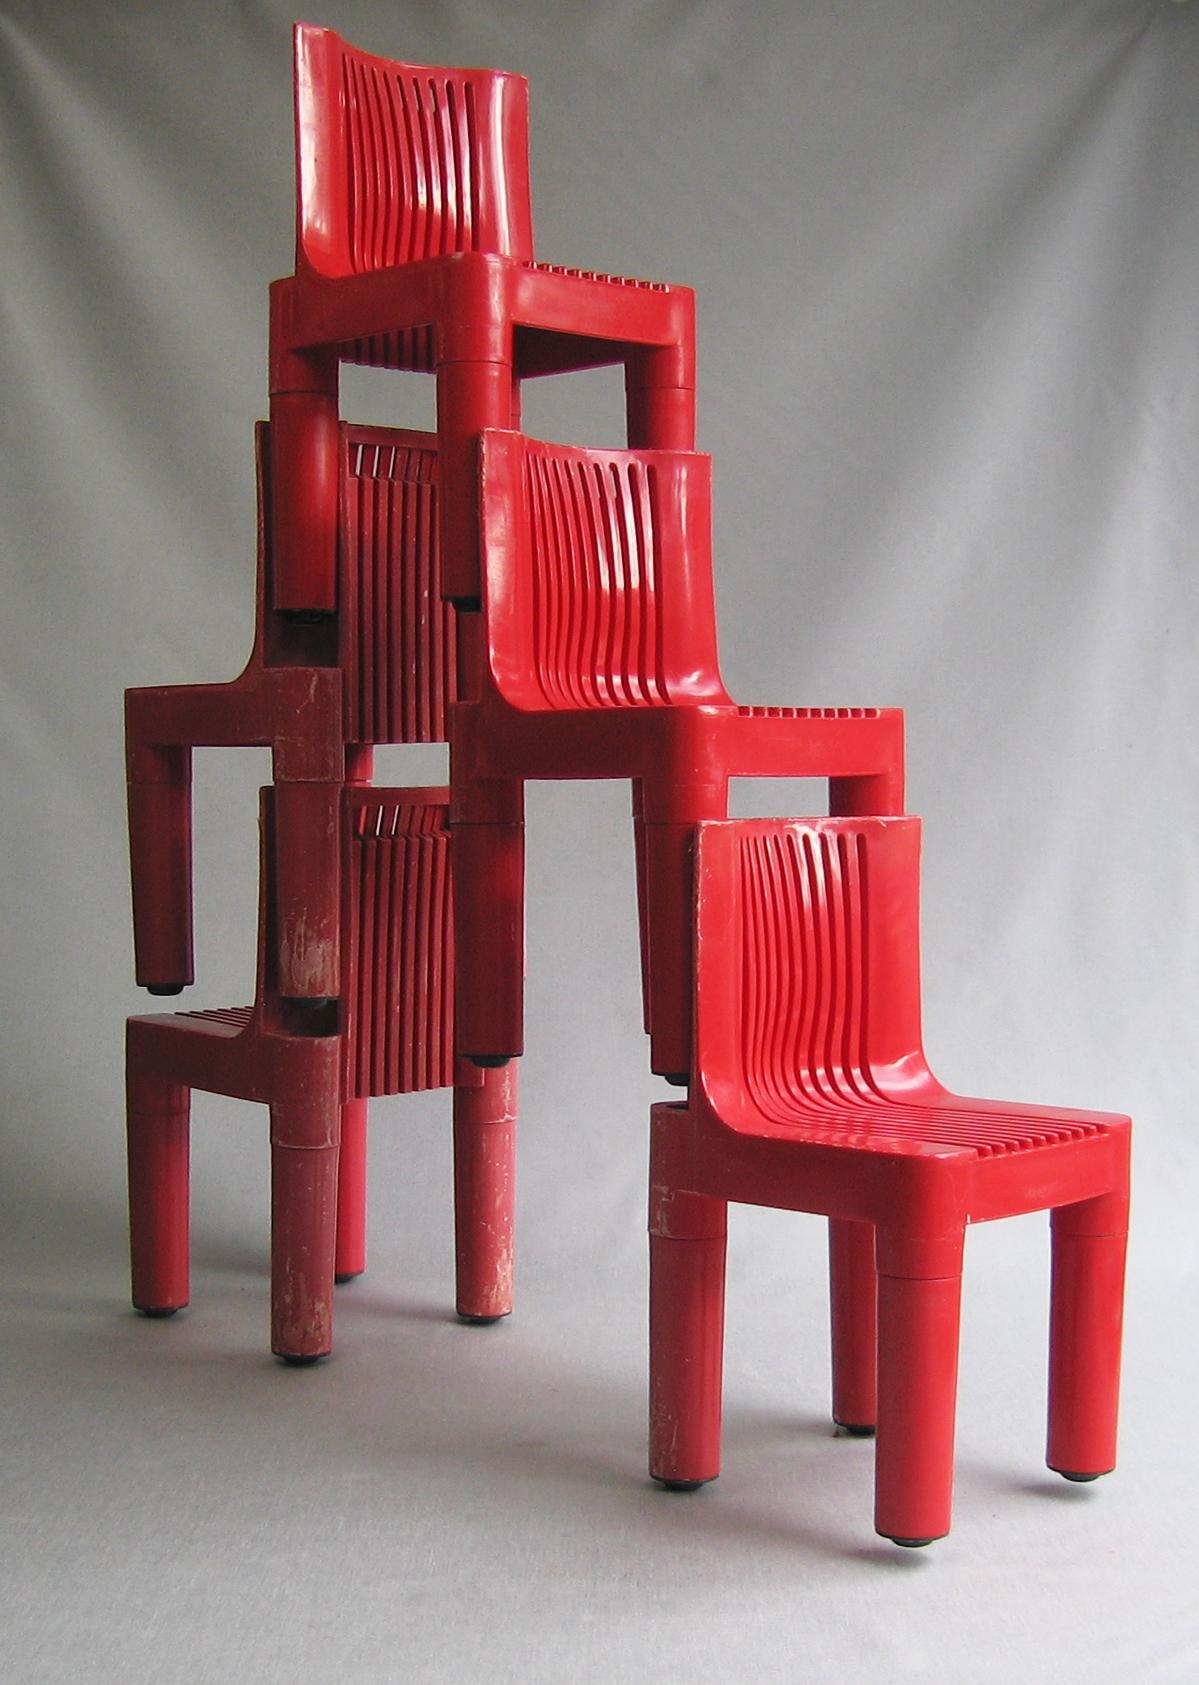 Plastic Chair model 4999 Kartell Marco Zanuso / Richard Sapper 1964 First production 6x For Sale